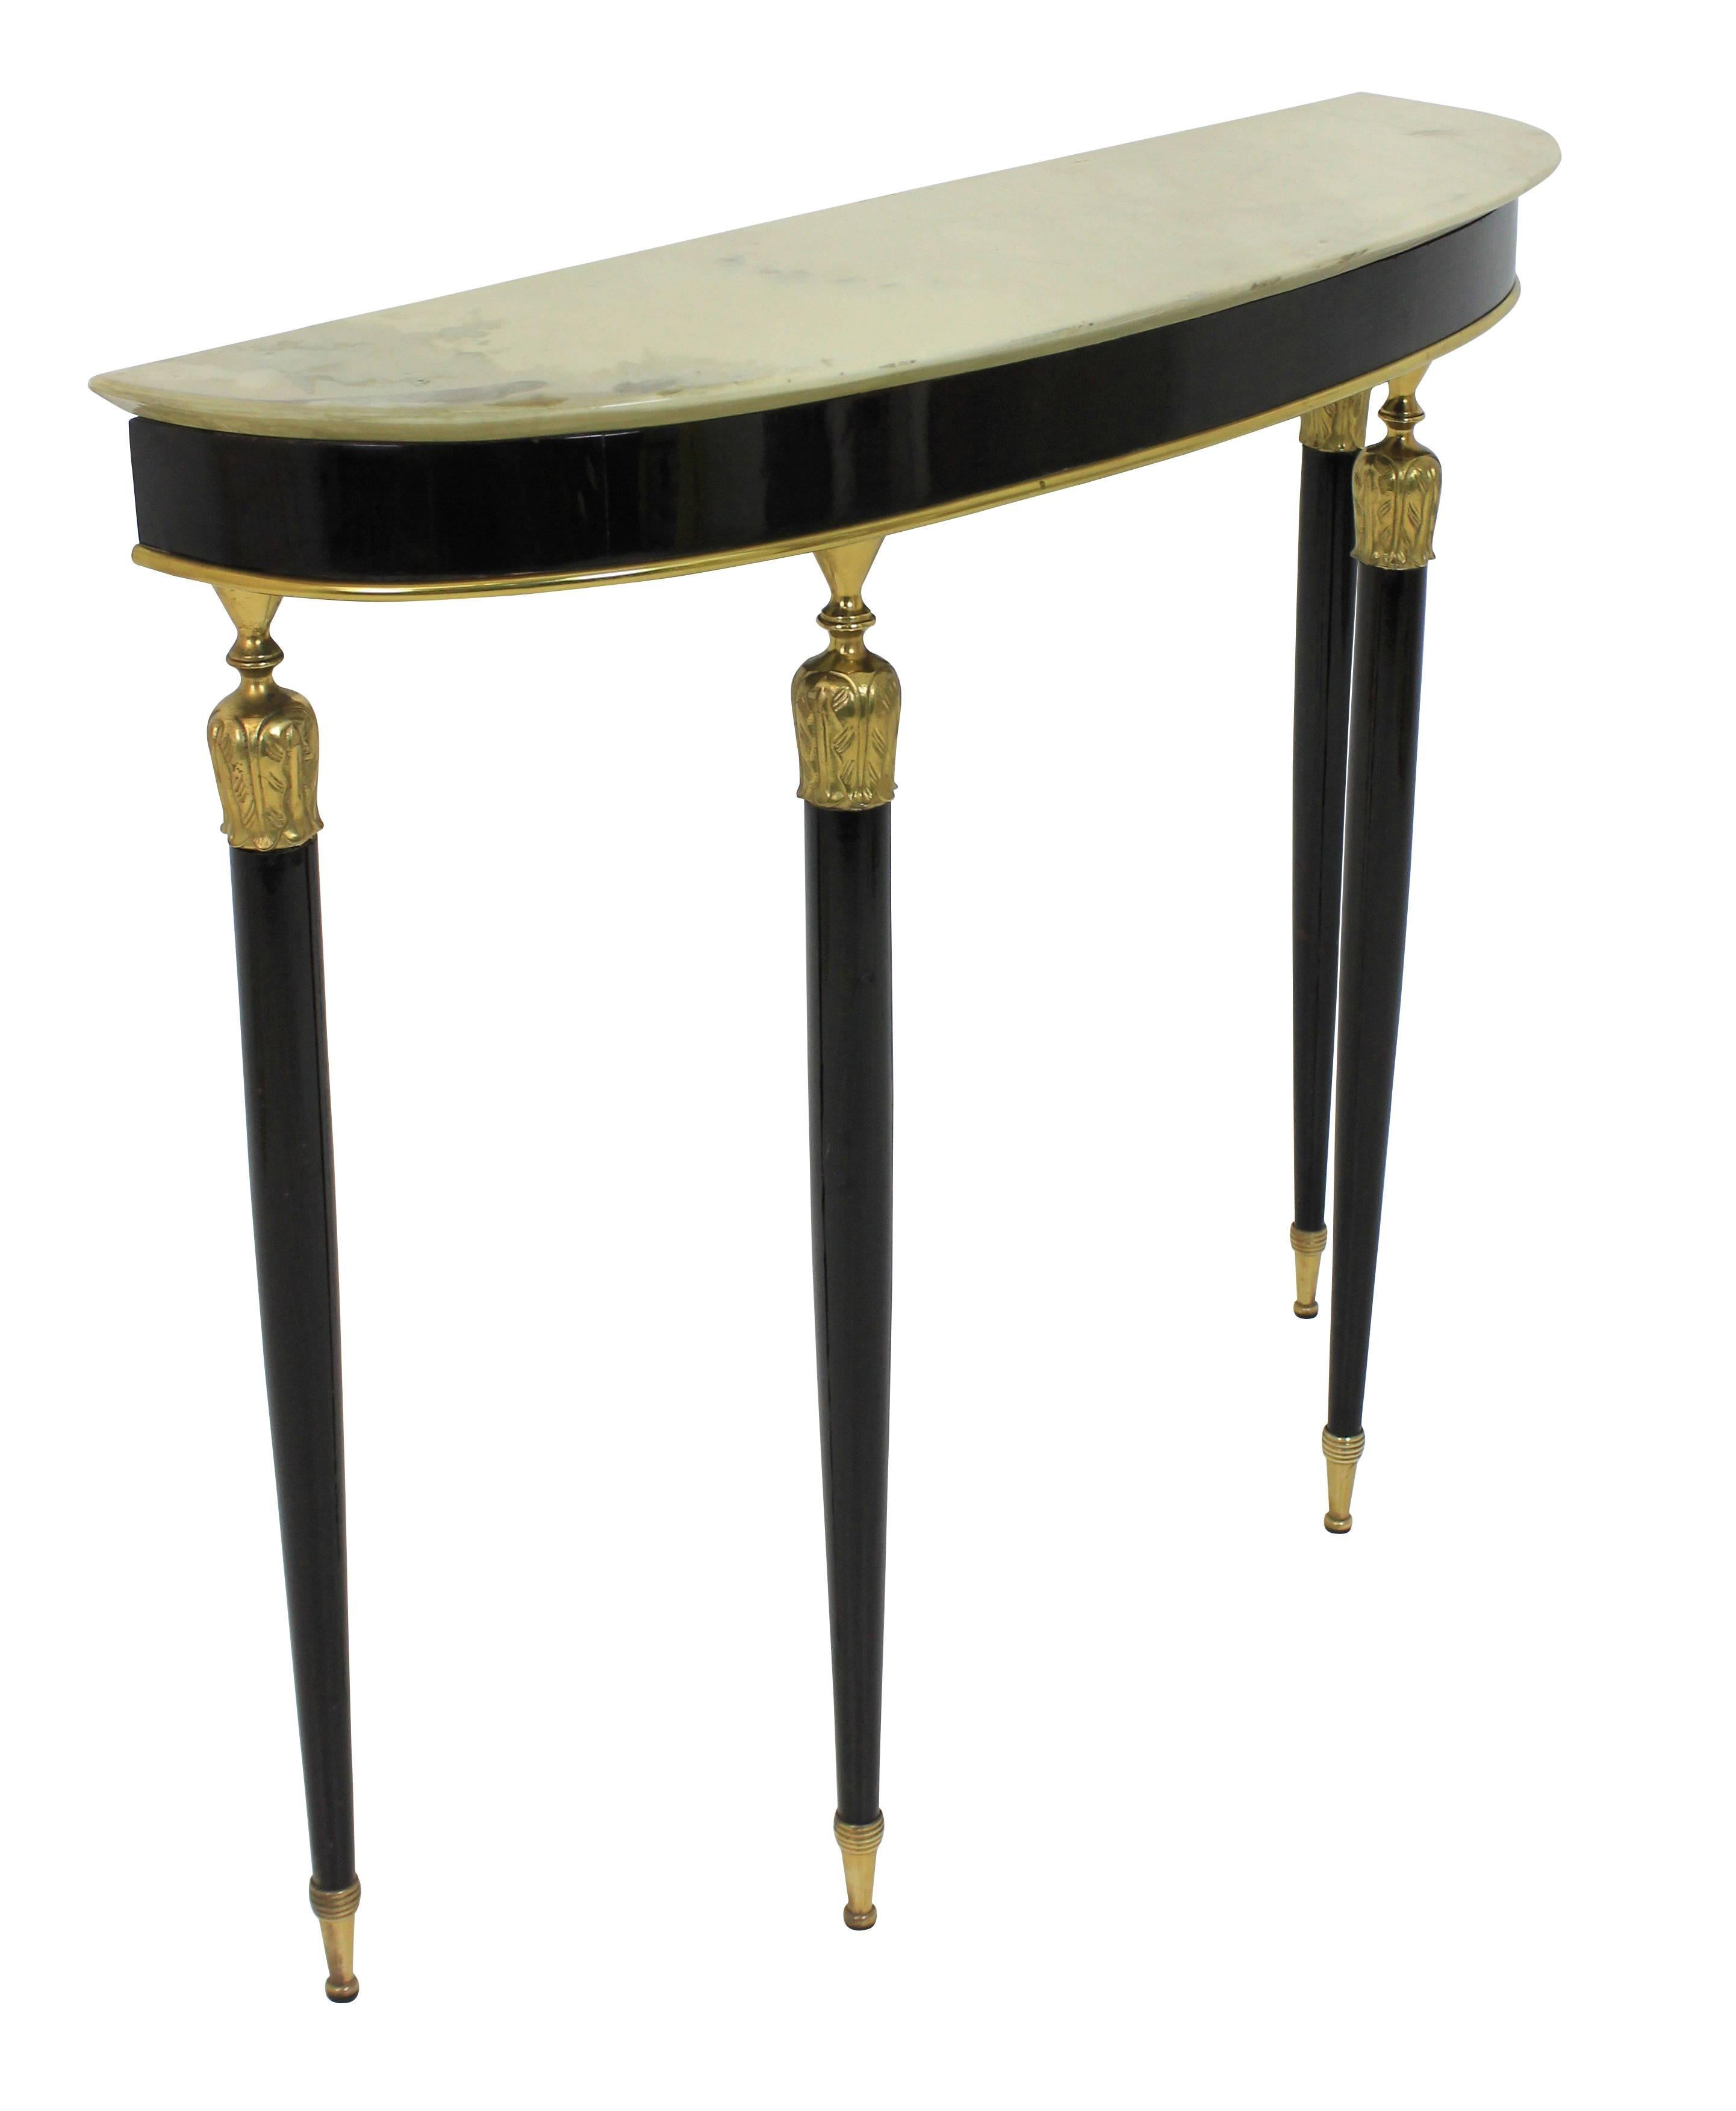 A stylish Italian demilune console table in black lacquer with brass mounts and sabot feet with a cream marble top.